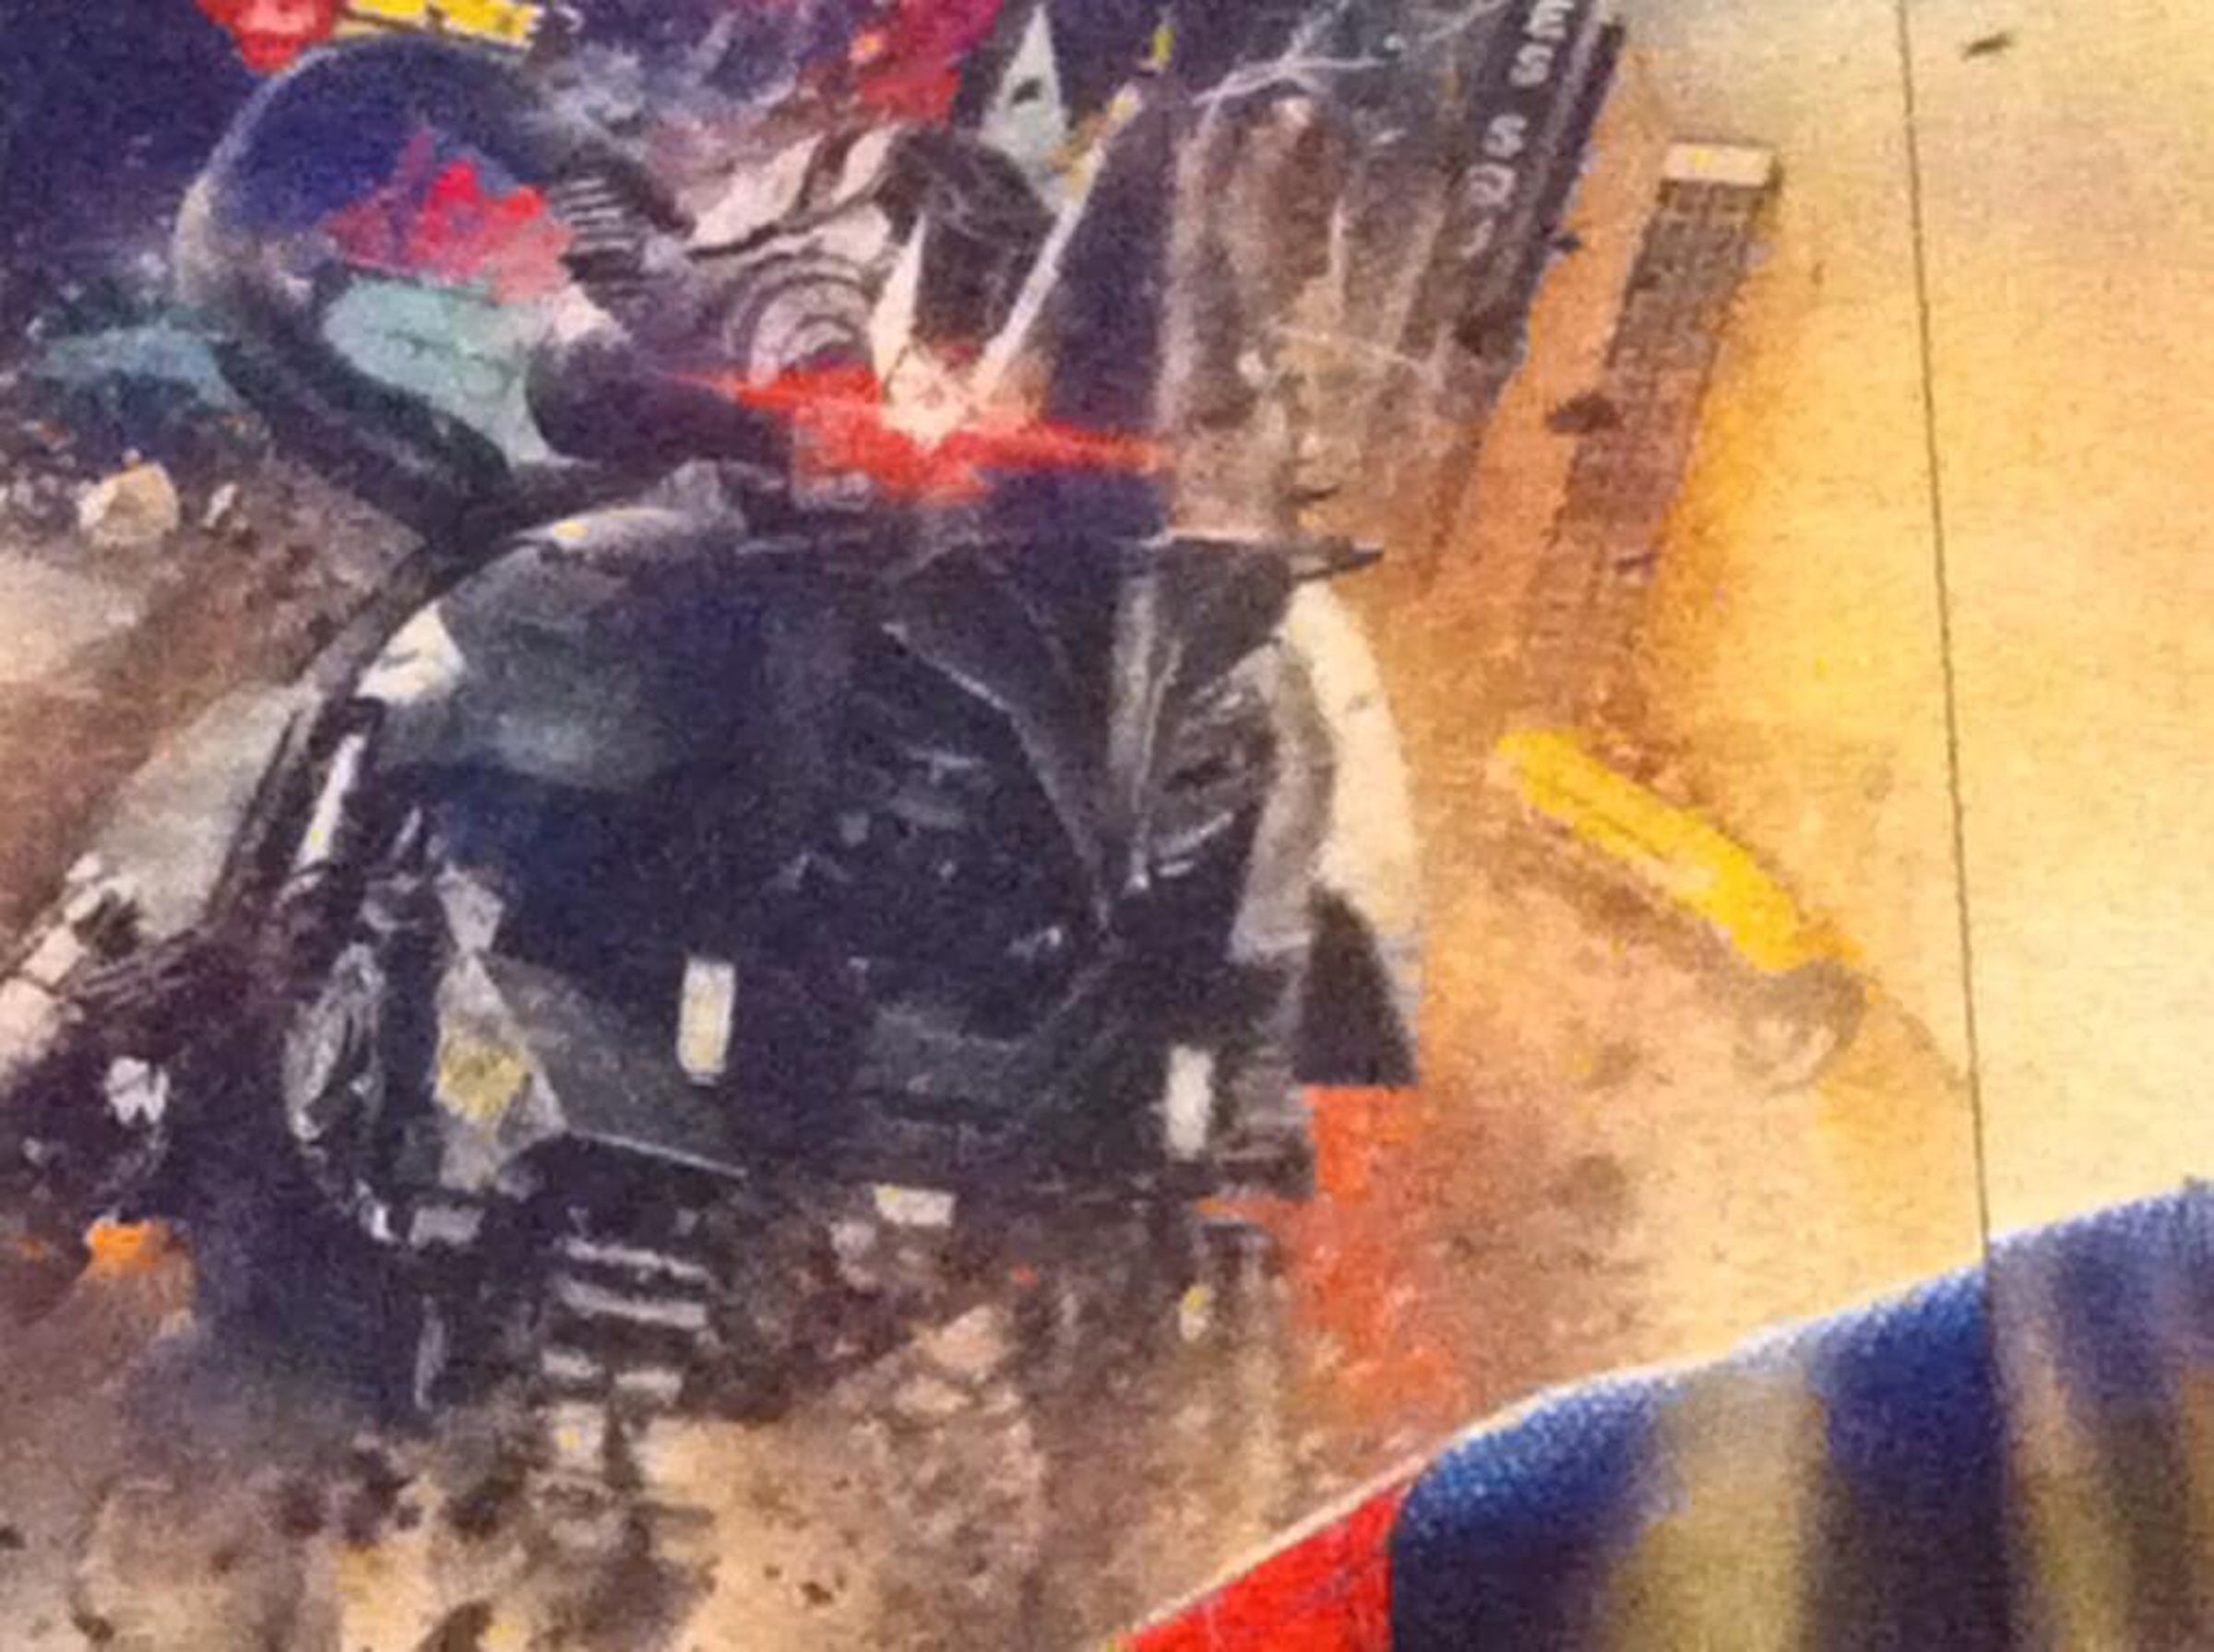 'The Amazing Spider-Man 2' poster photos